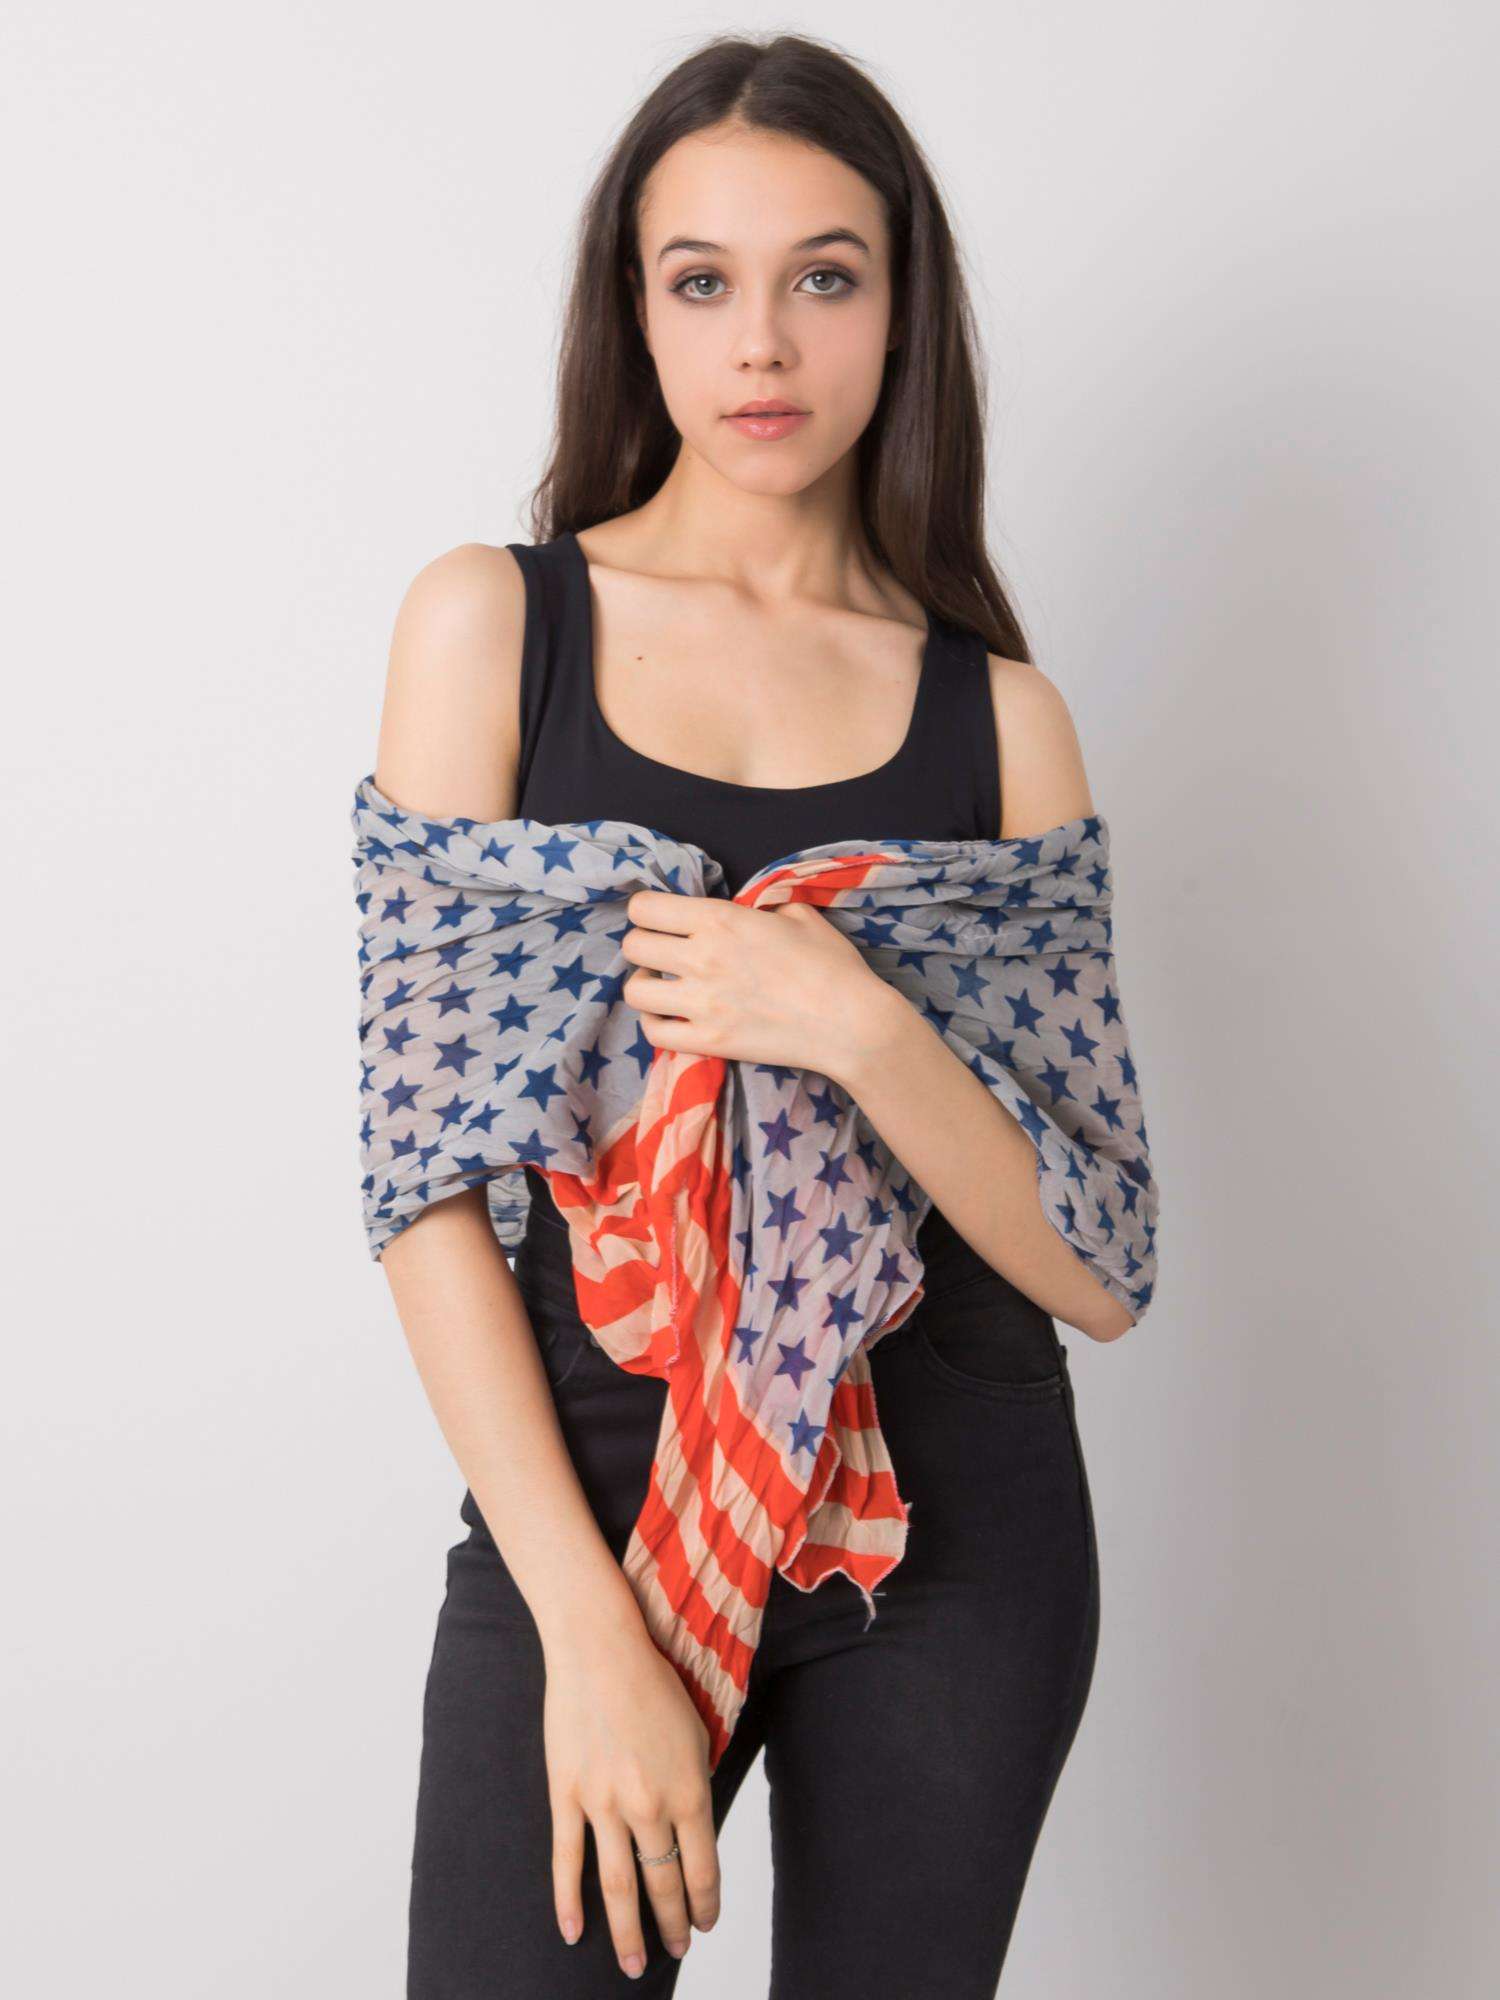 Blue and red patterned scarf